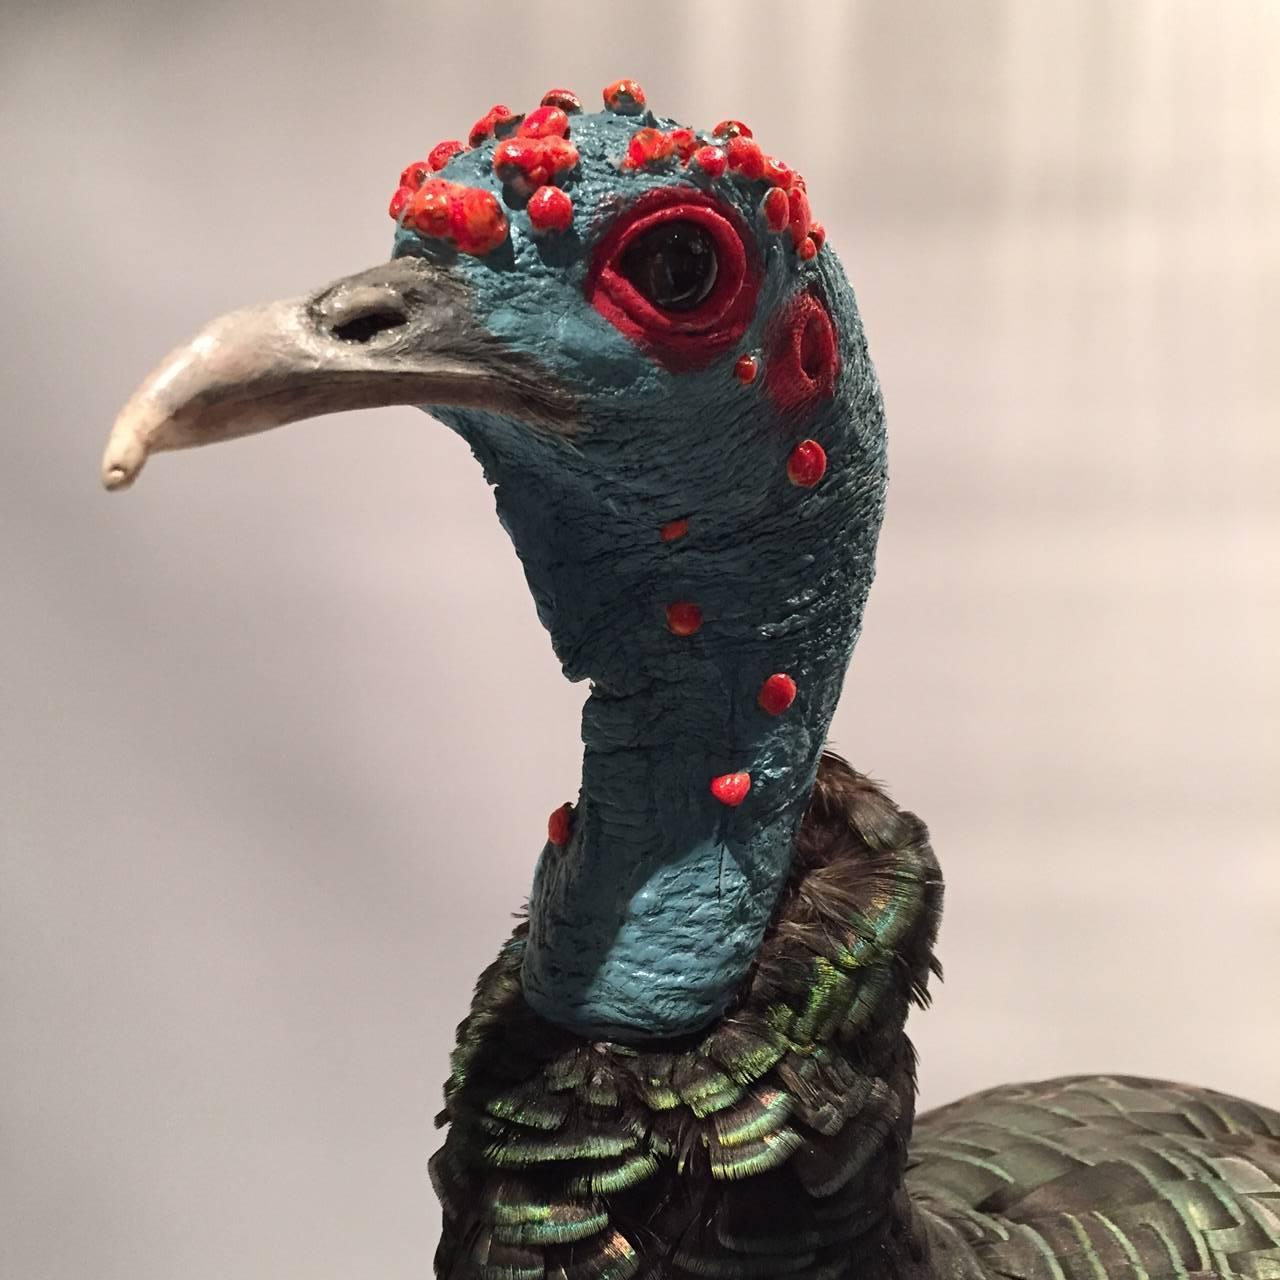 Ocellated Turkey (Meleagris ocellata) Taxidermied Specimen, mounted on a wooden base. This species is found primarily in the Yucatán Peninsula, Mexico. 